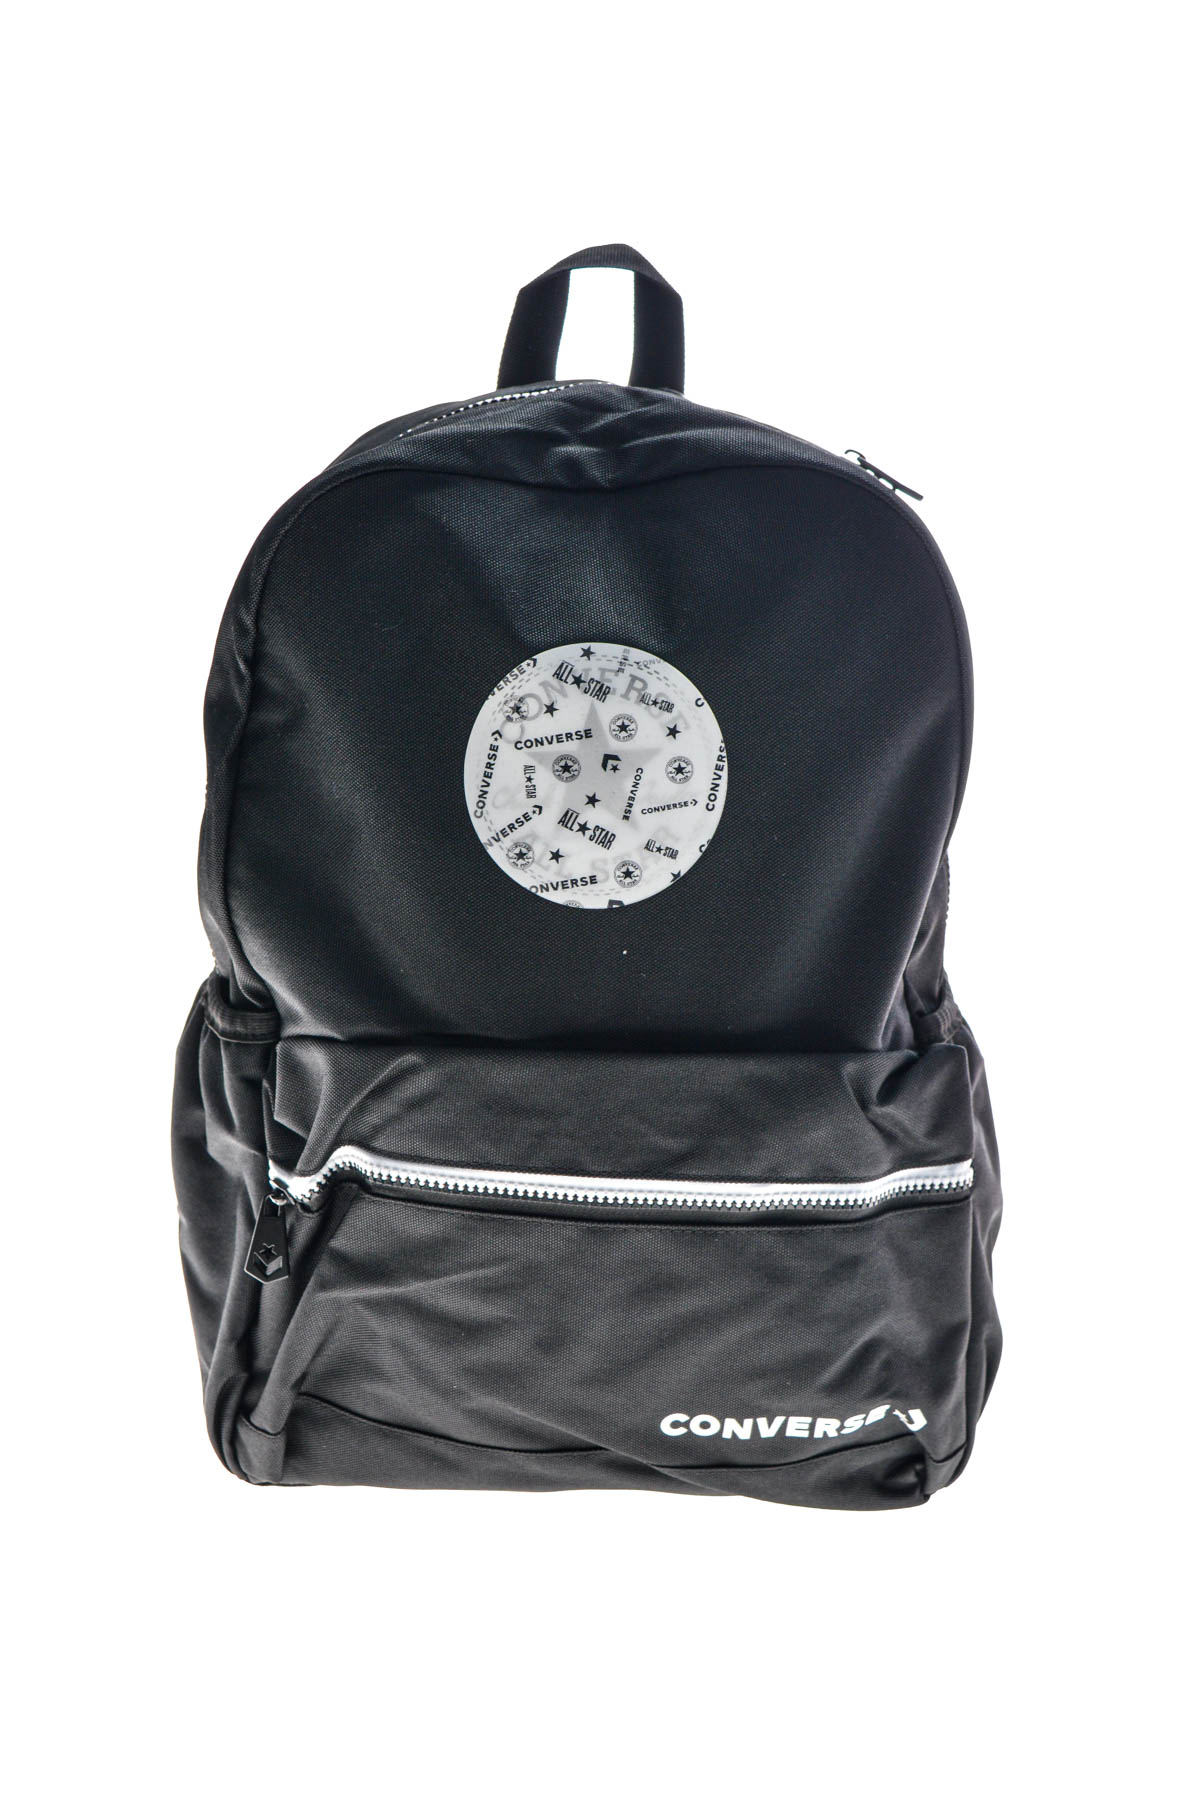 Backpack - Convers - 0